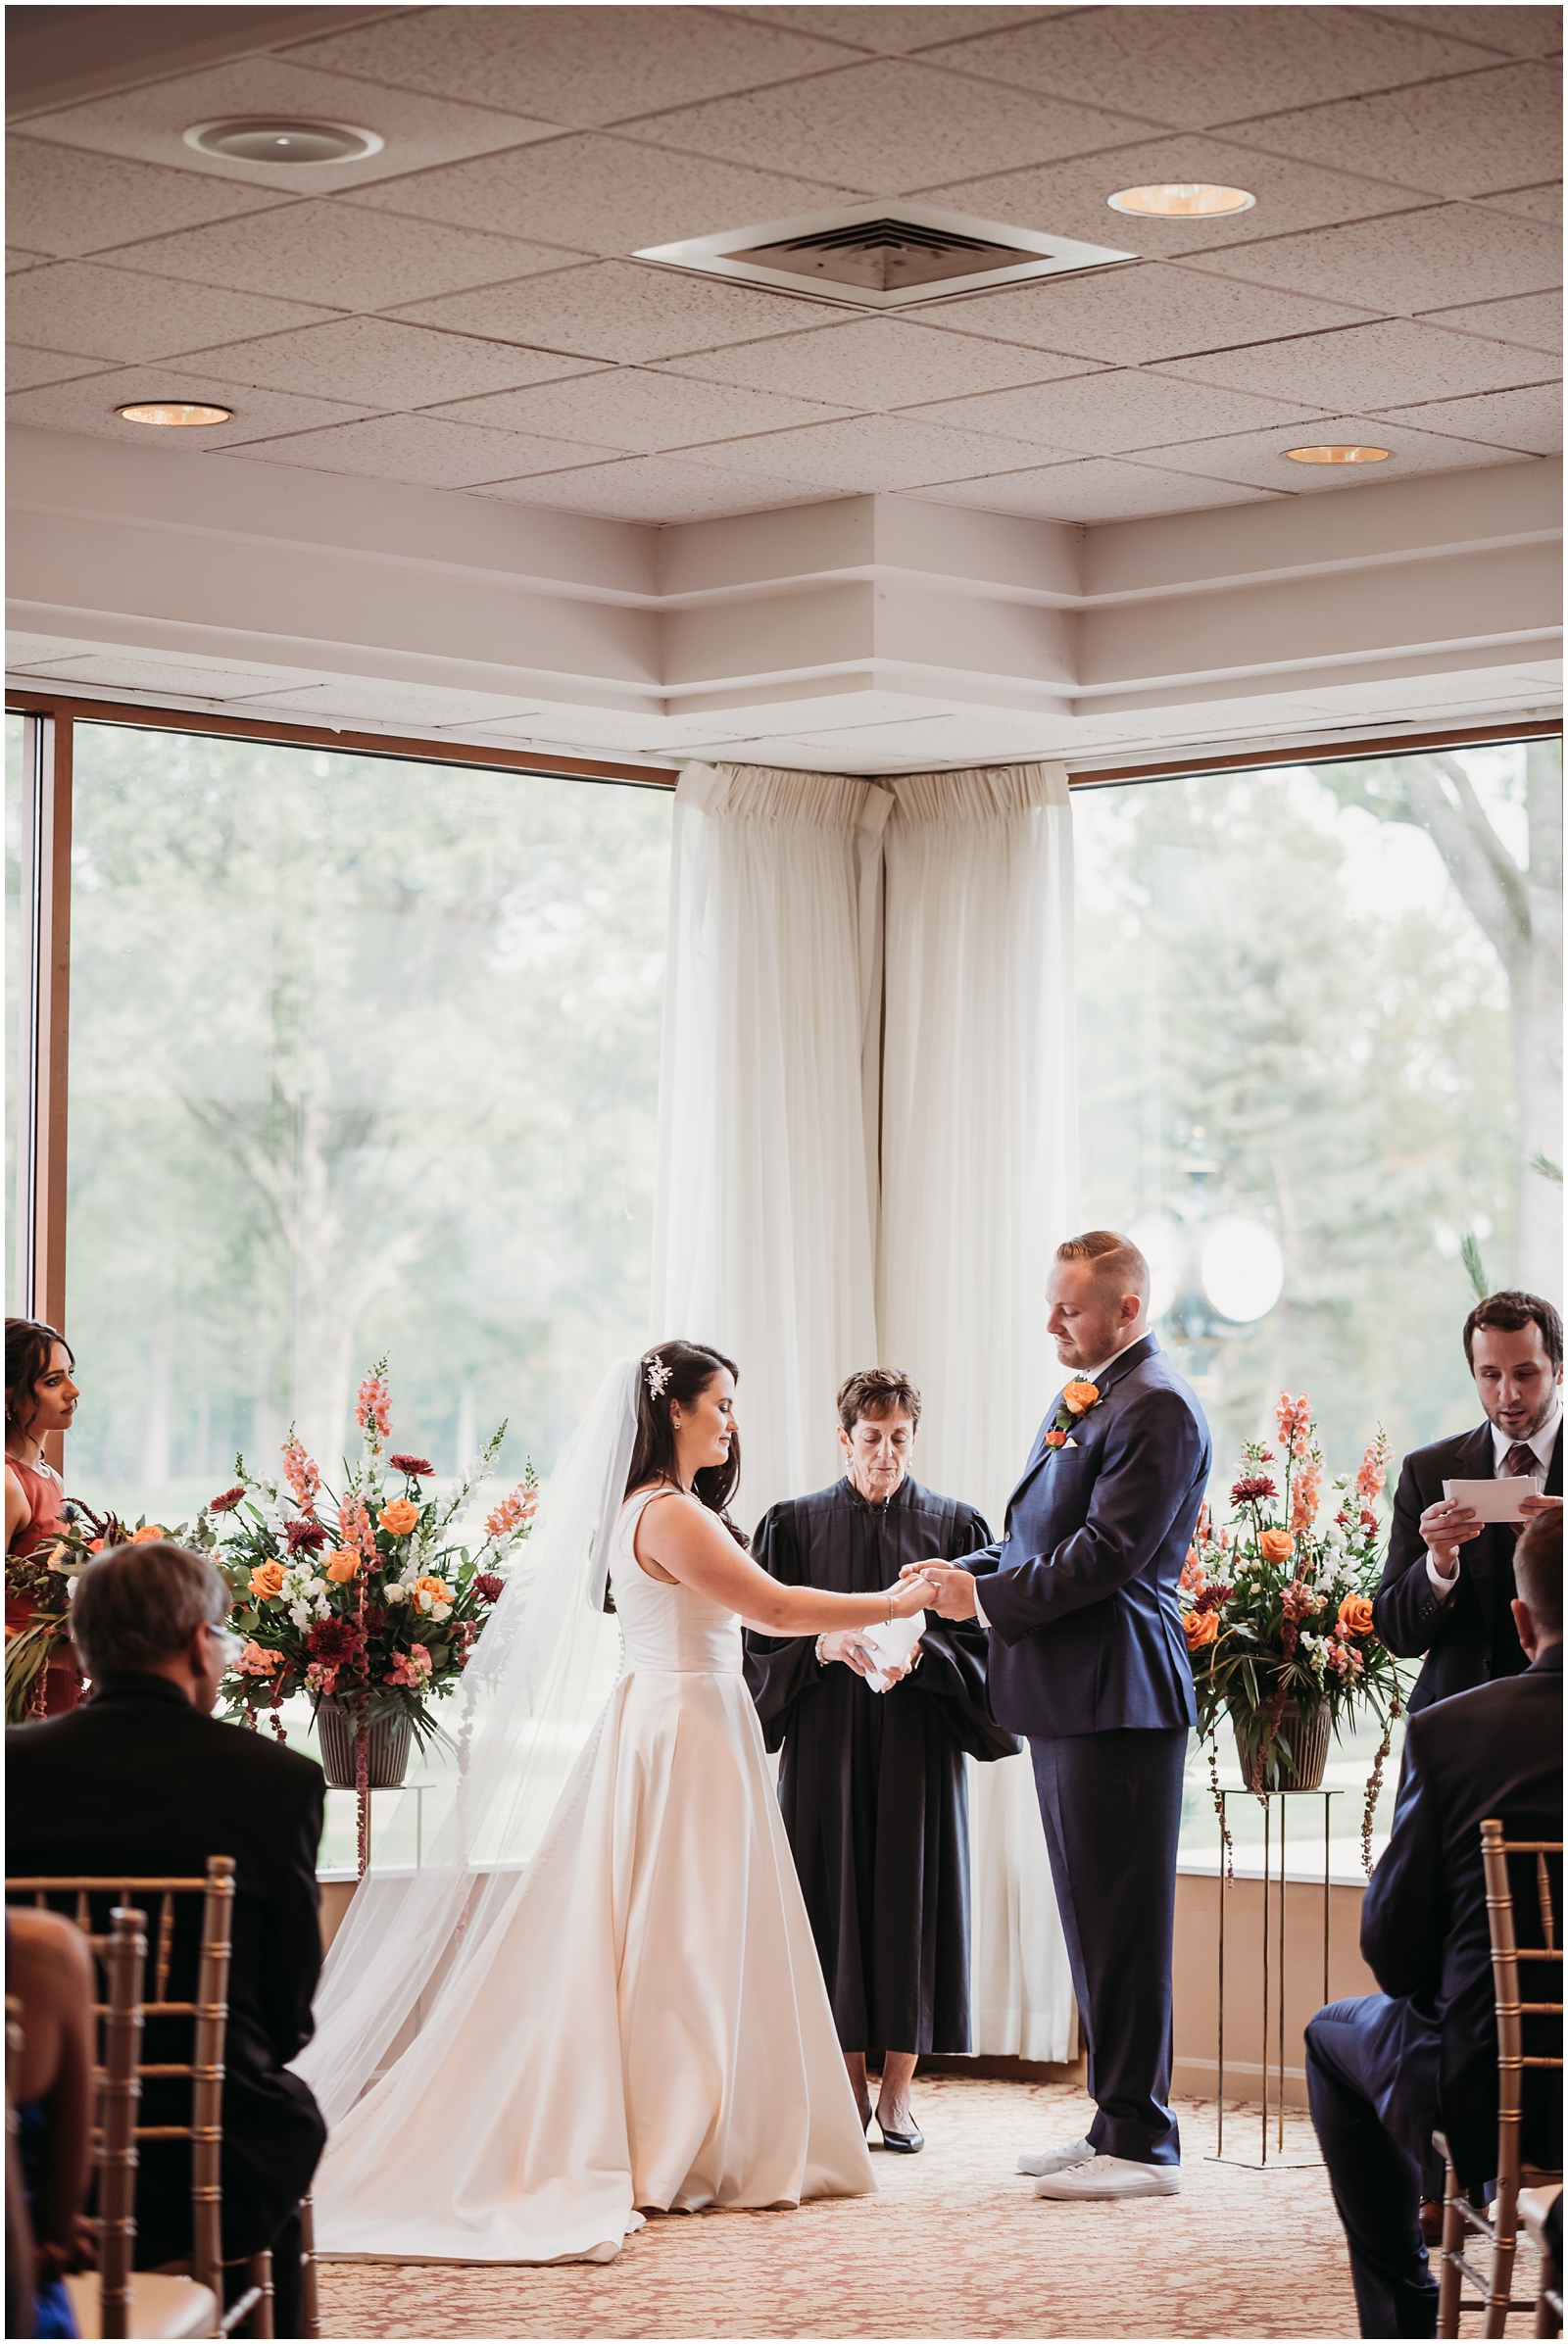 Indoor Ceremony at Avon Oaks Country Club